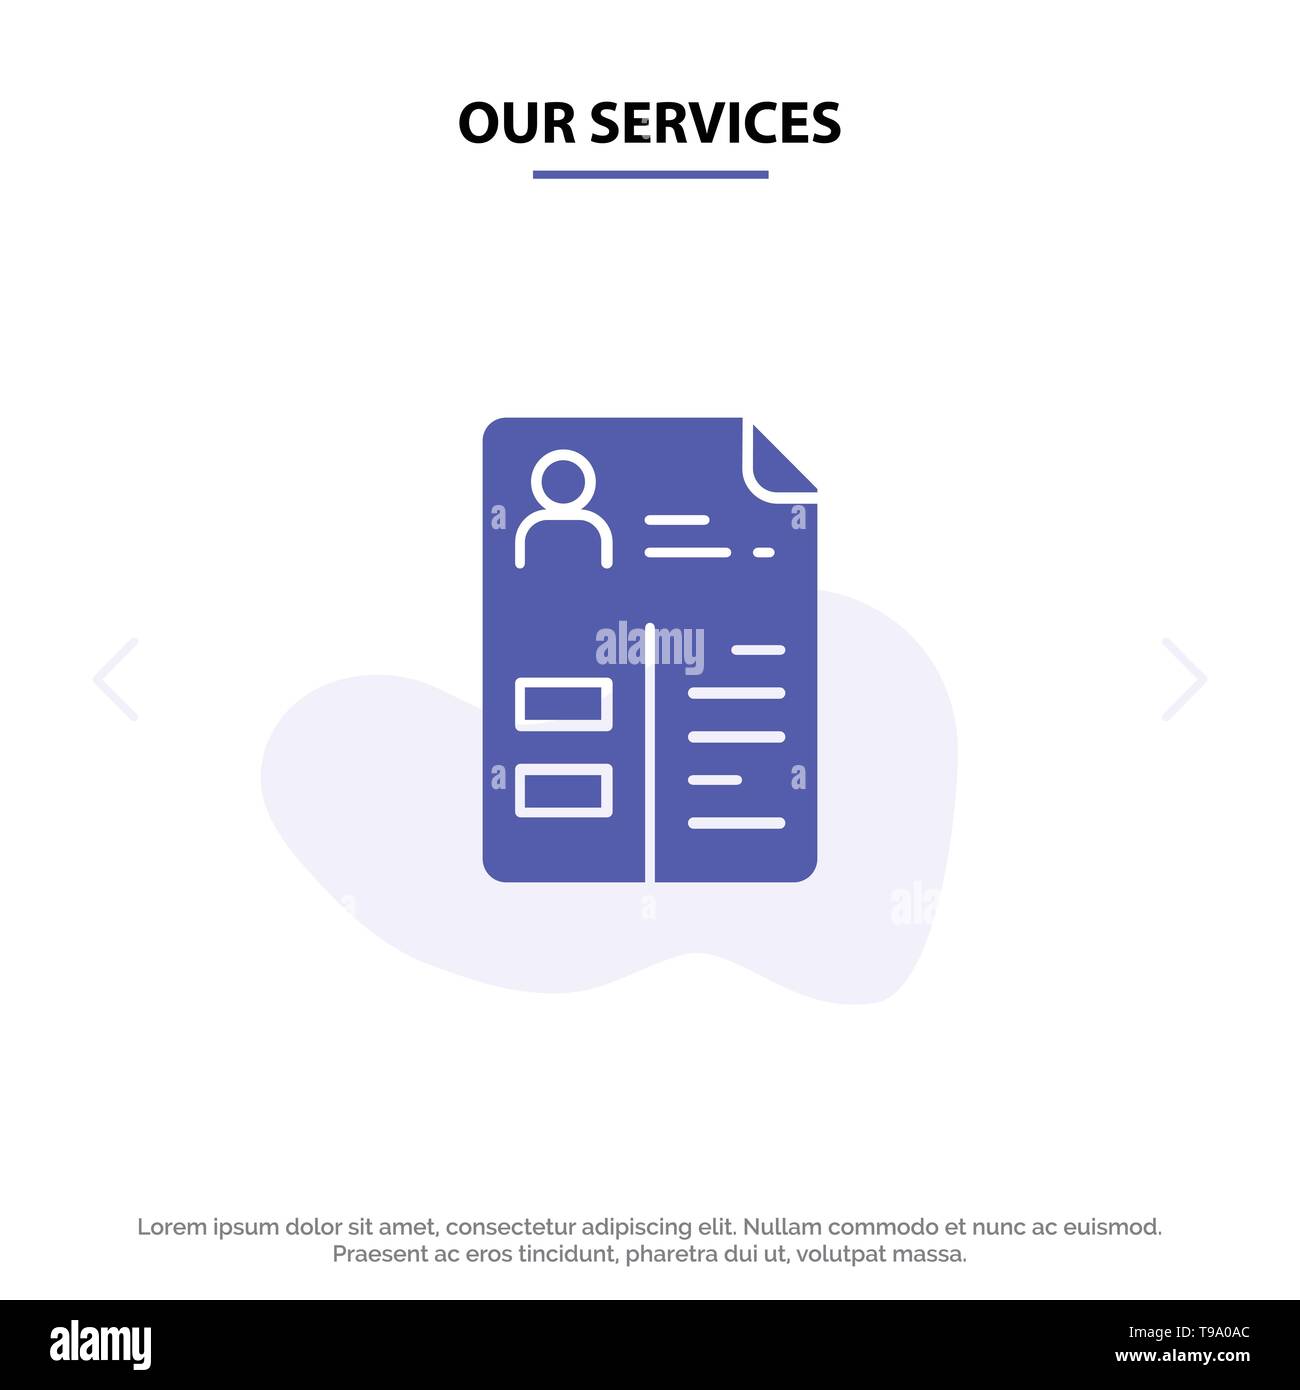 Our Services Curriculum, Cv, Job, Portfolio Solid Glyph Icon Web With Service Job Card Template